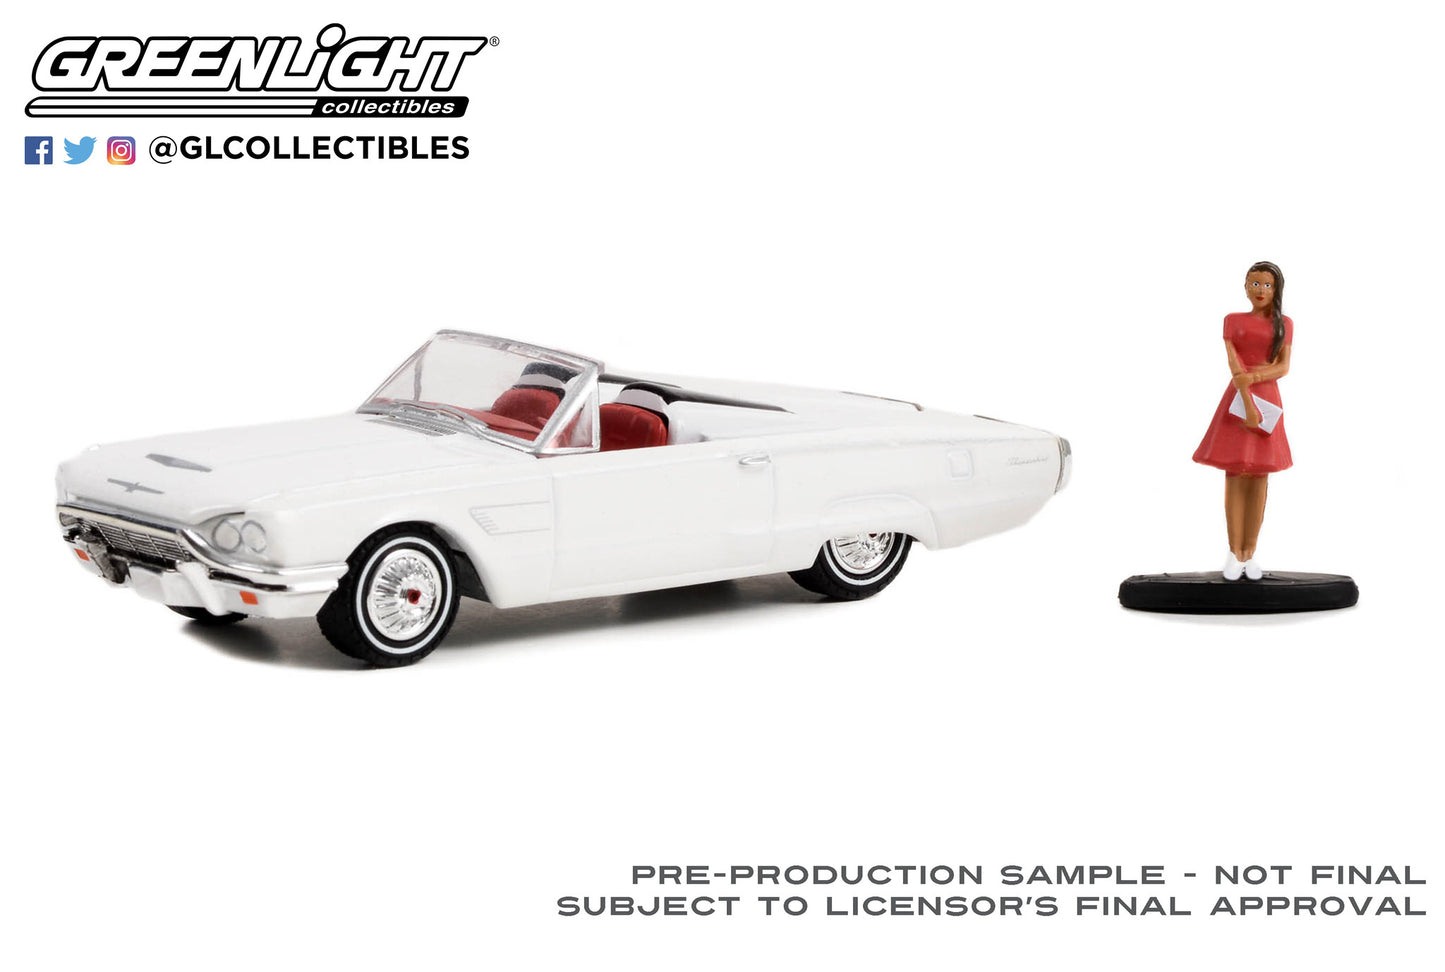 GreenLight 1:64 The Hobby Shop Series 14 - 1965 Ford Thunderbird Convertible (Tonneau Cover) with Woman in Dress 97140-B